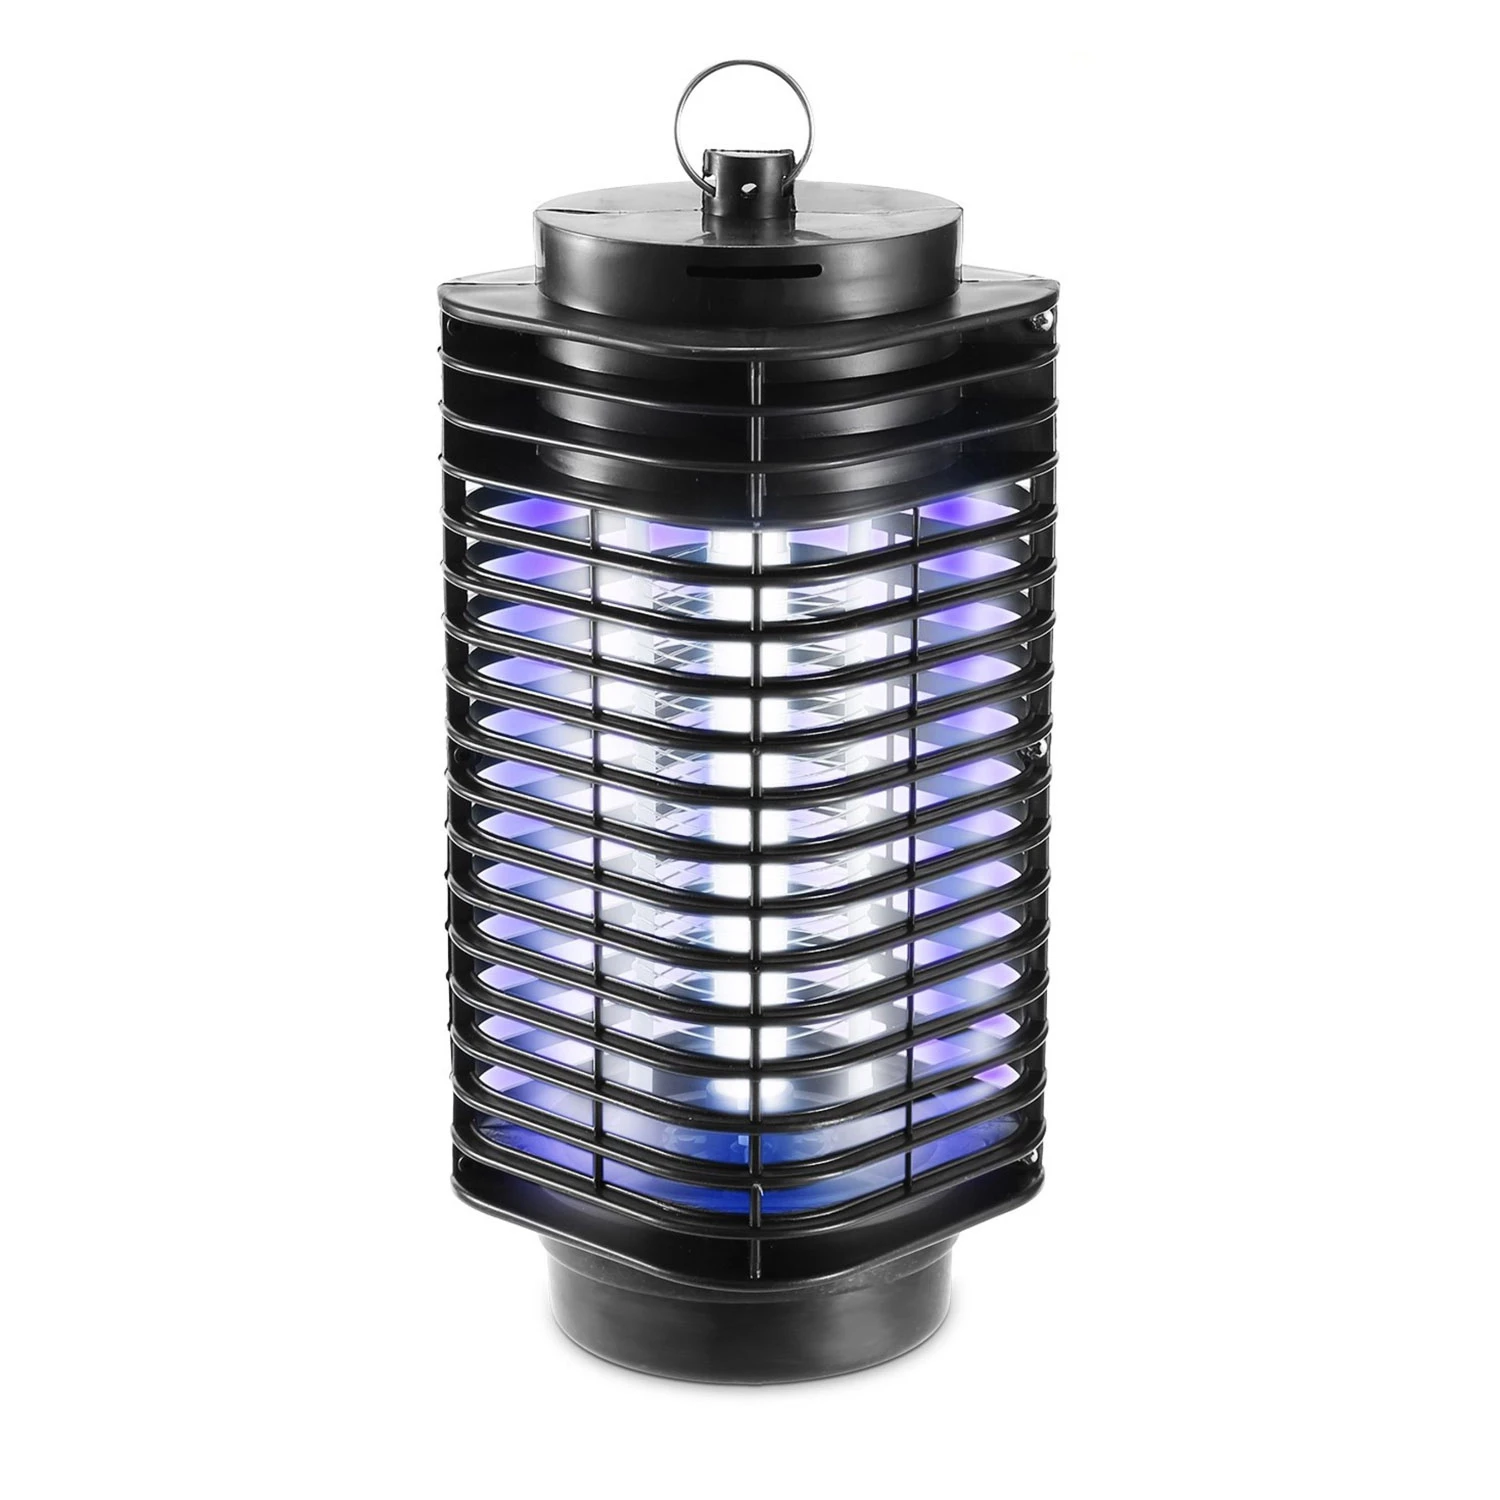 UV Bug Zapper - Silent Insect Killer for Home And Restaurant - Odorless - 75+ Pieces